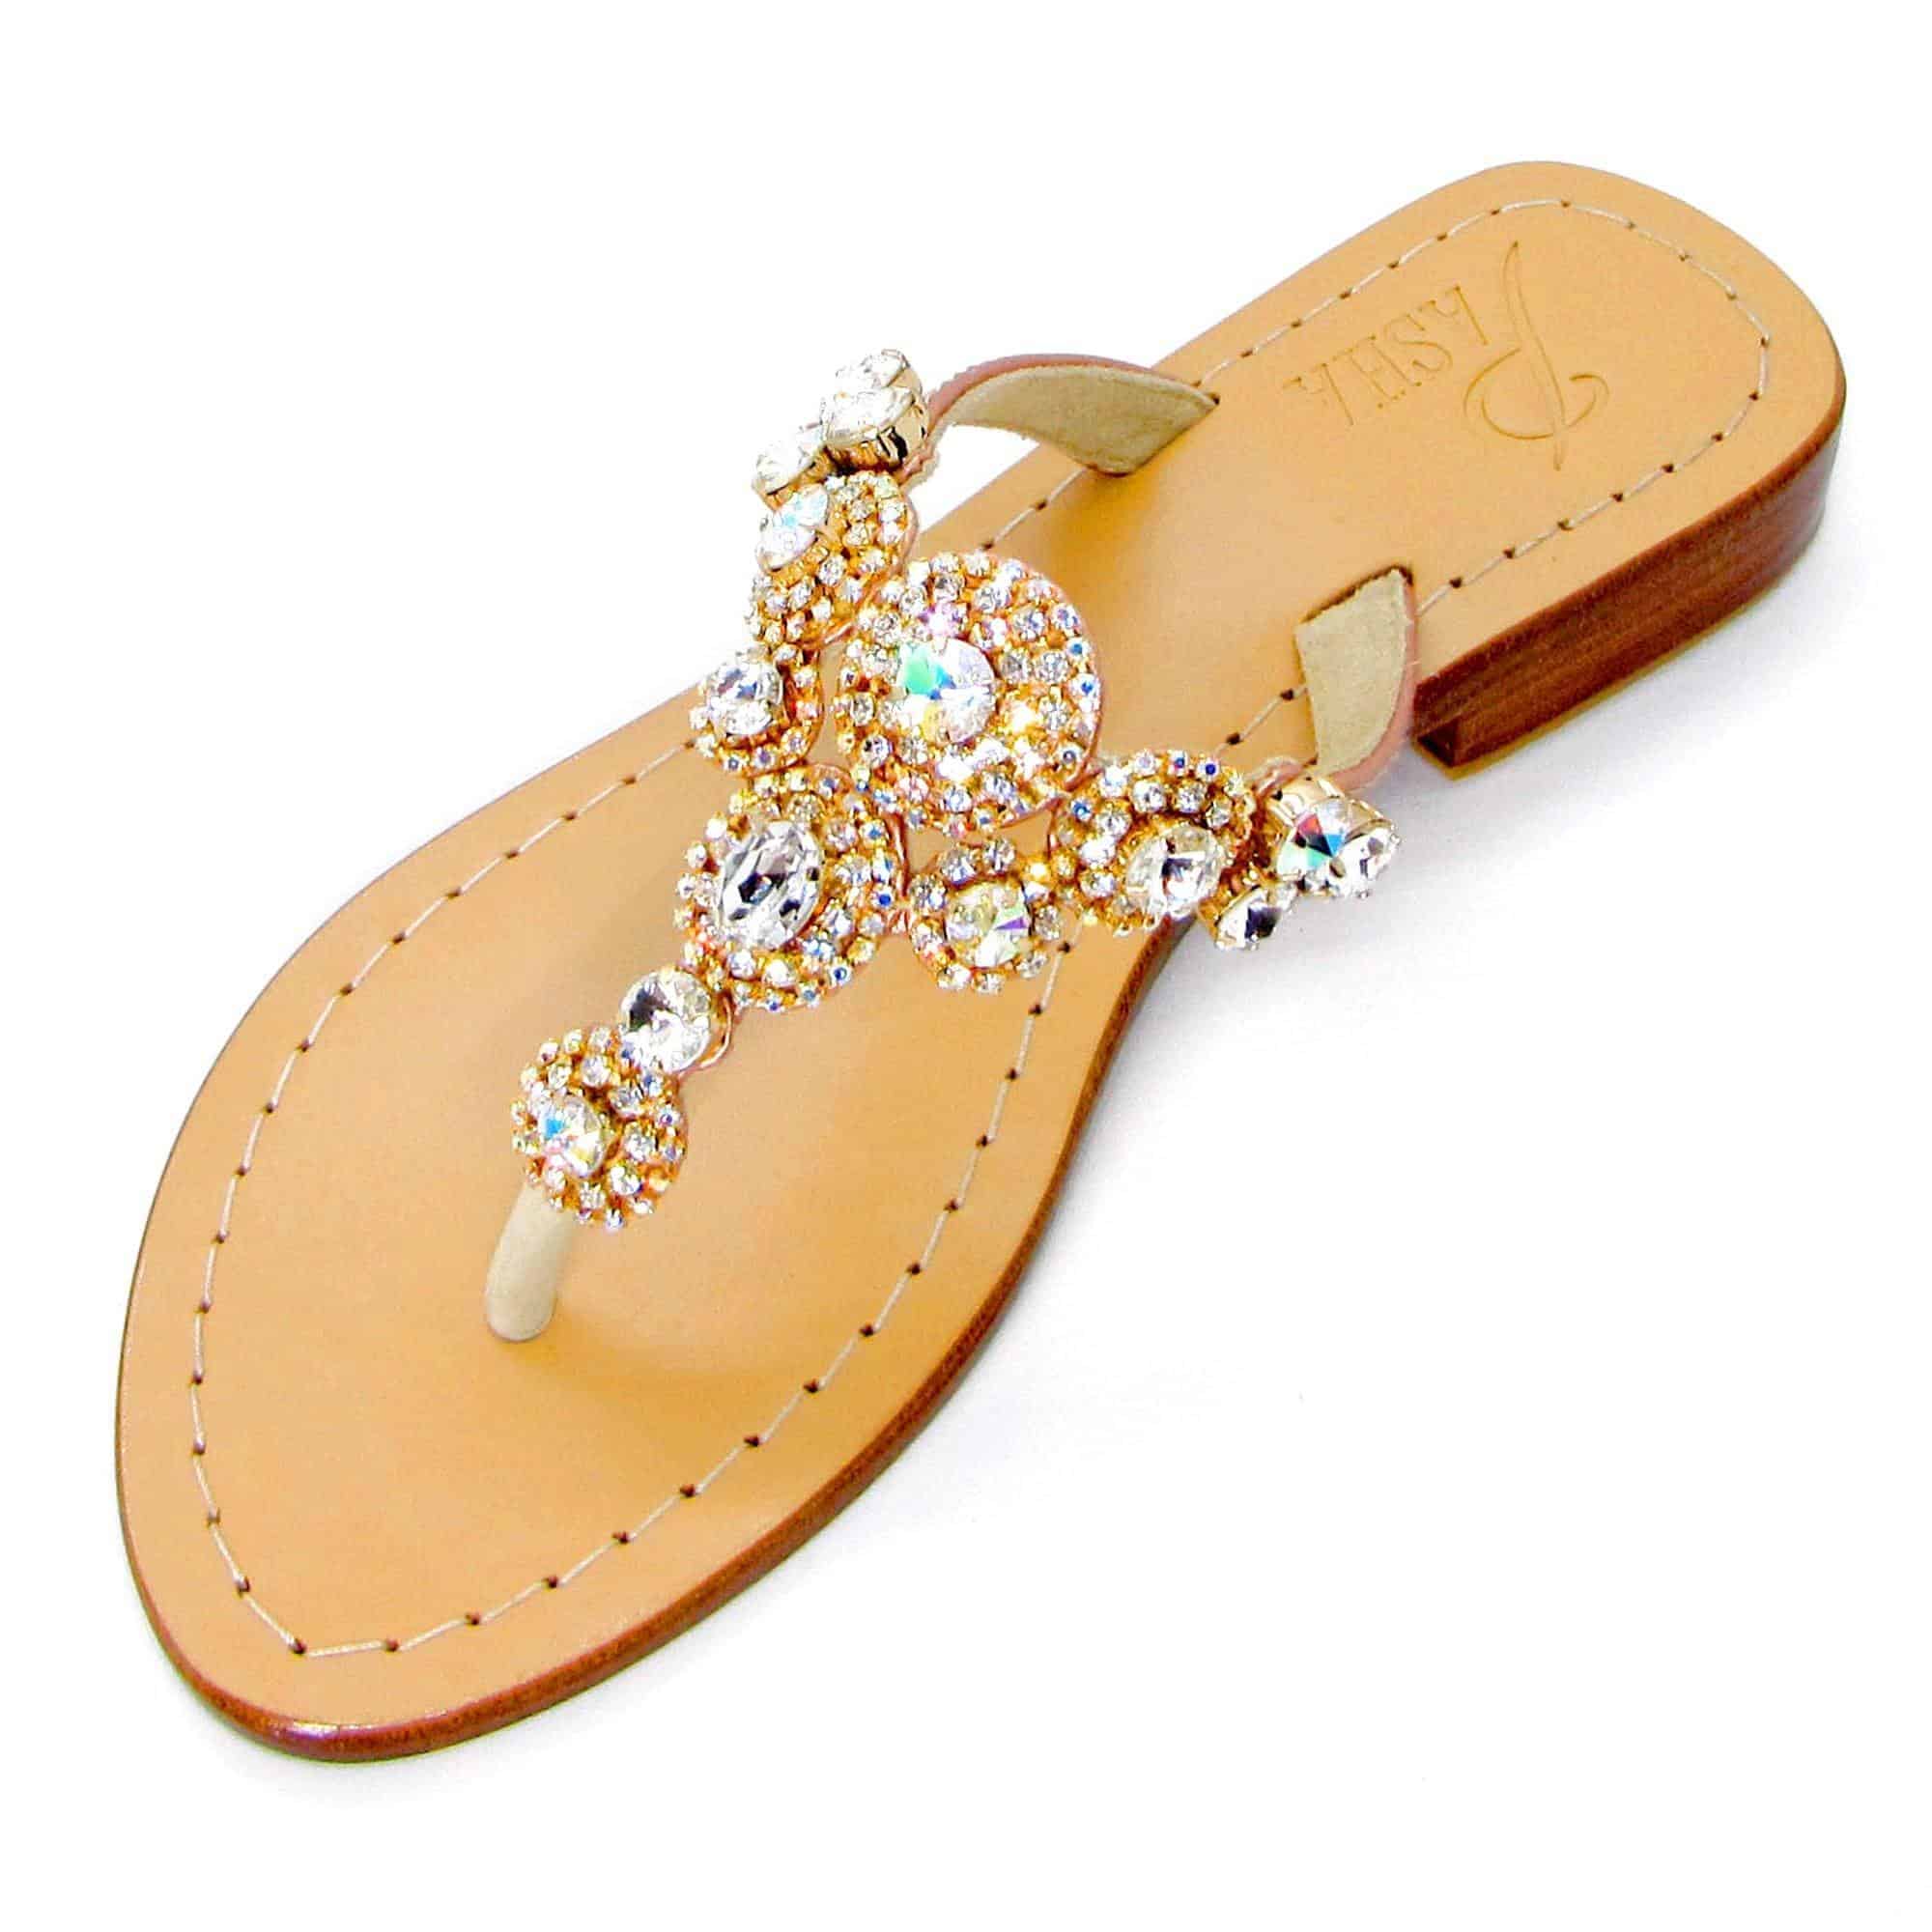 KOMODO - Pasha Sandals - Jewelry for your feet - 